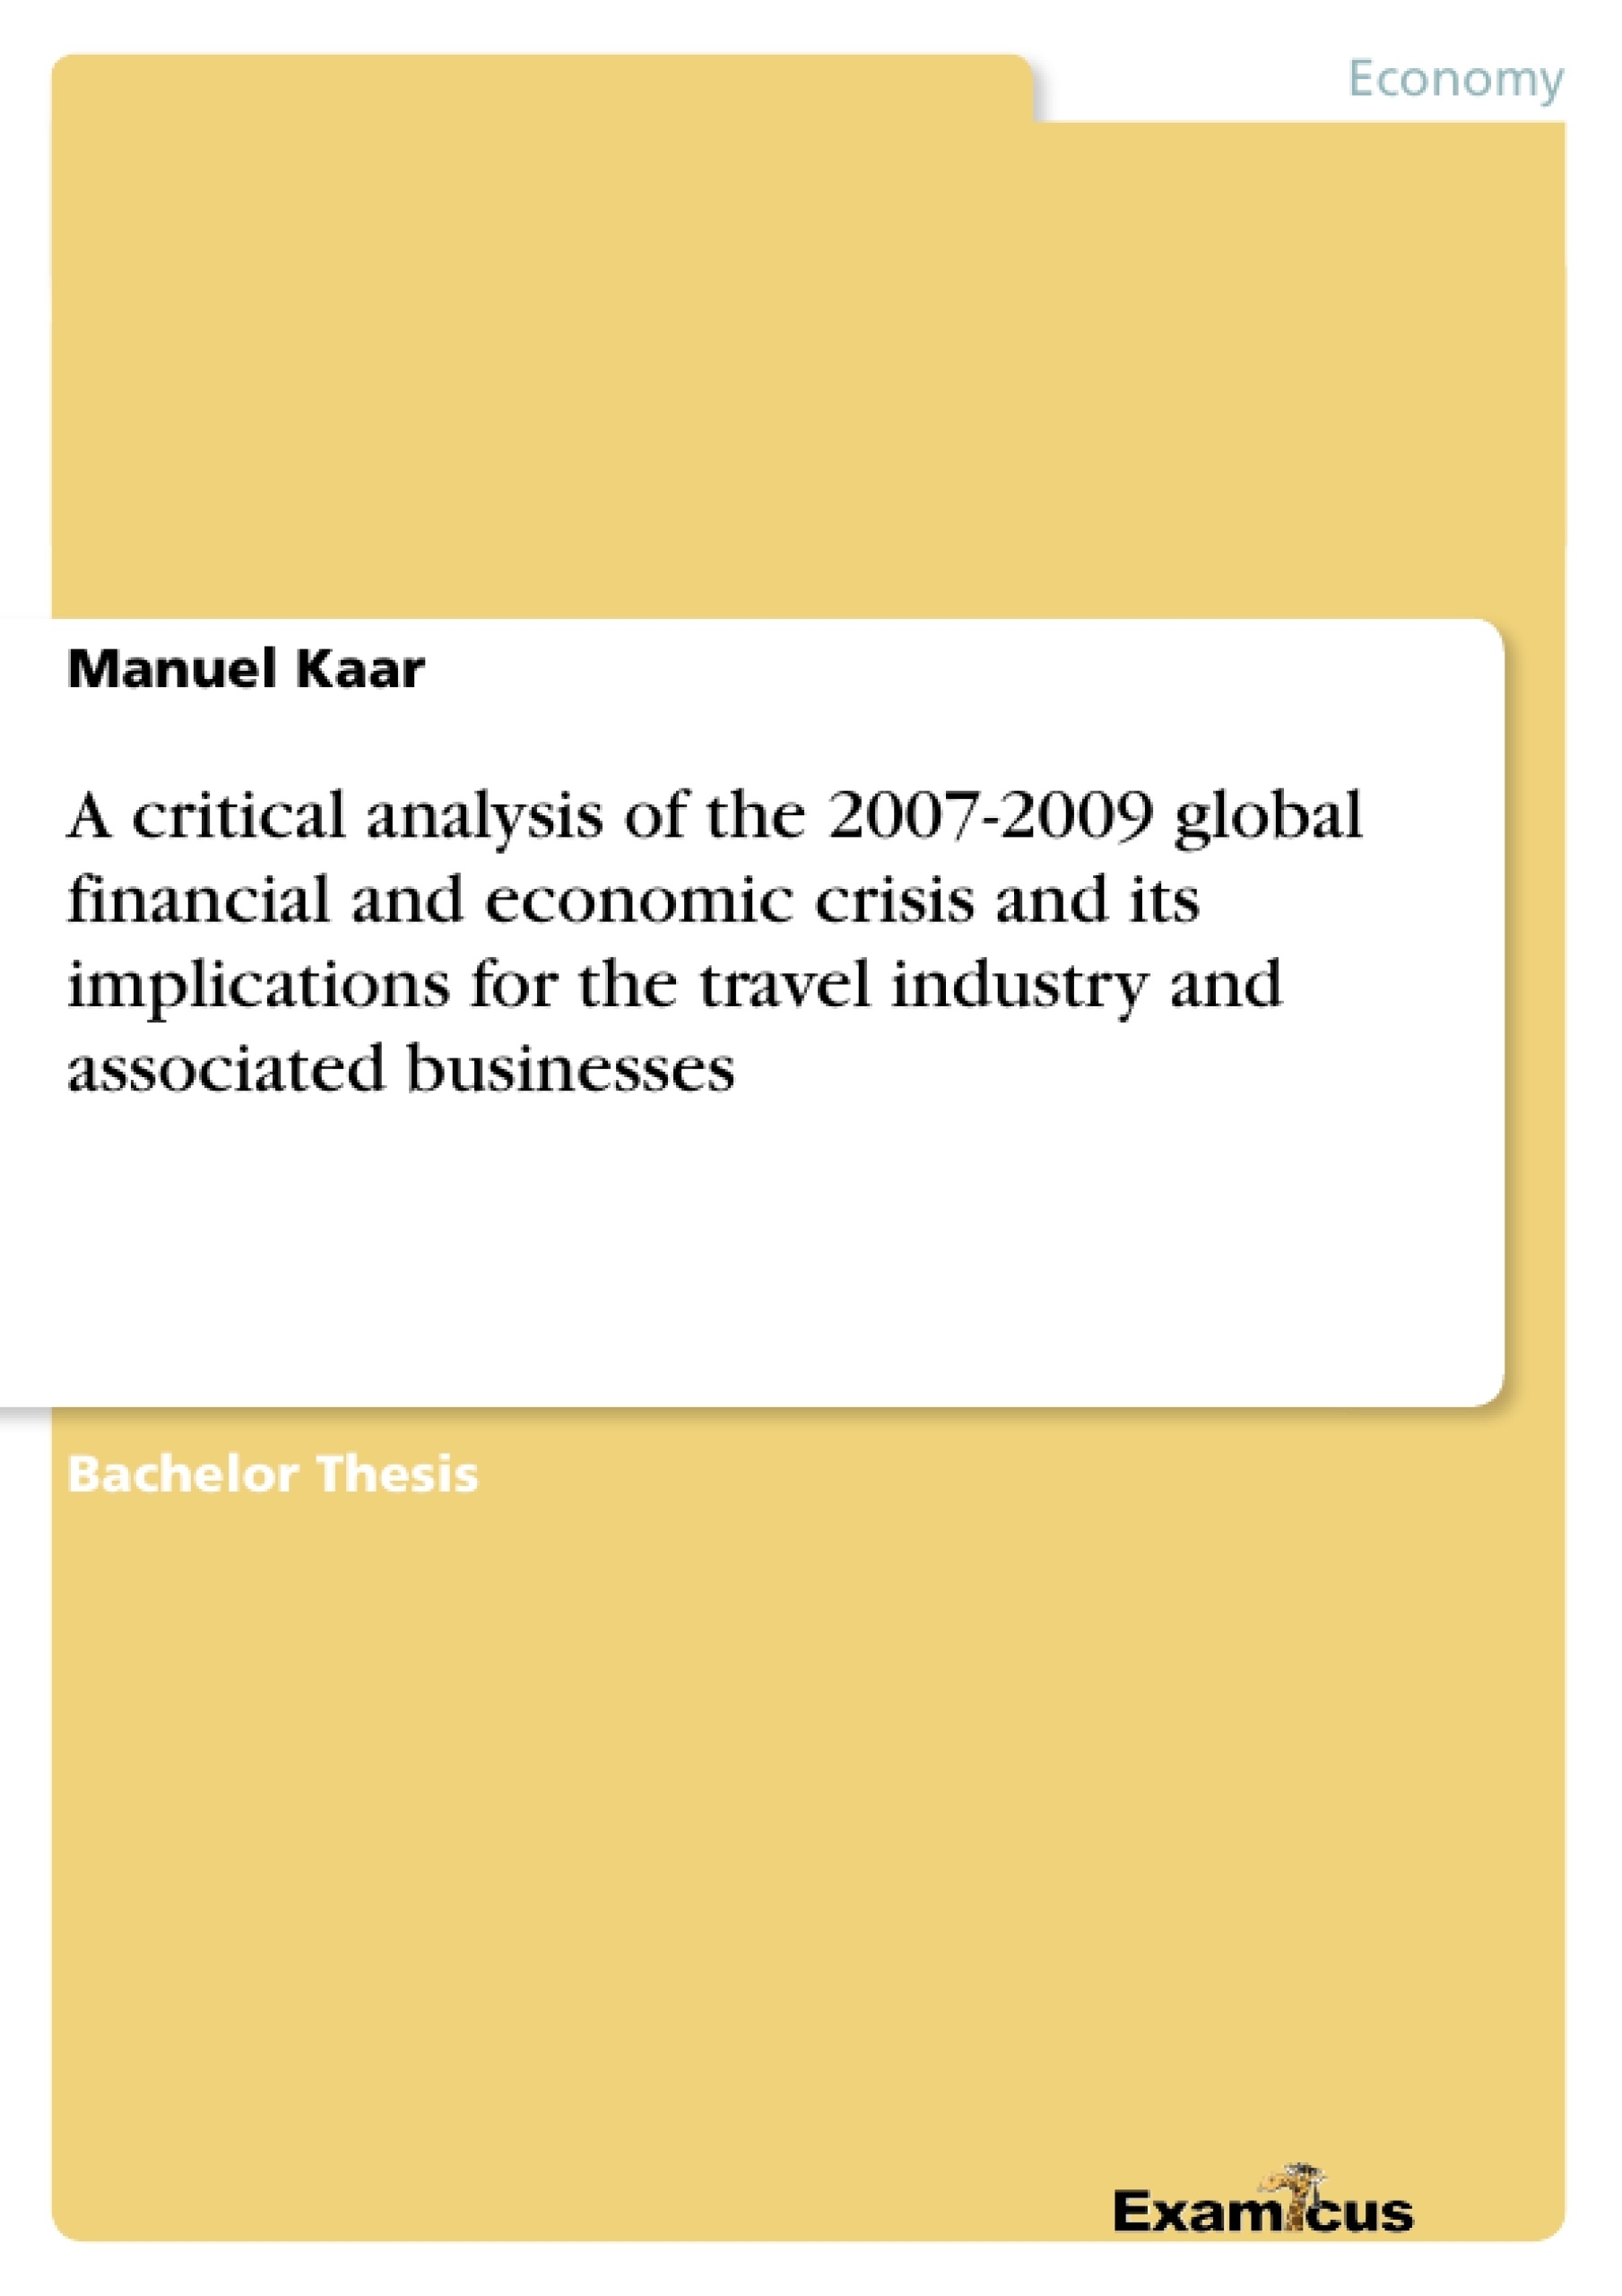 Title: A critical analysis of the 2007-2009 global financial and economic crisis and its implications for the travel industry and associated businesses